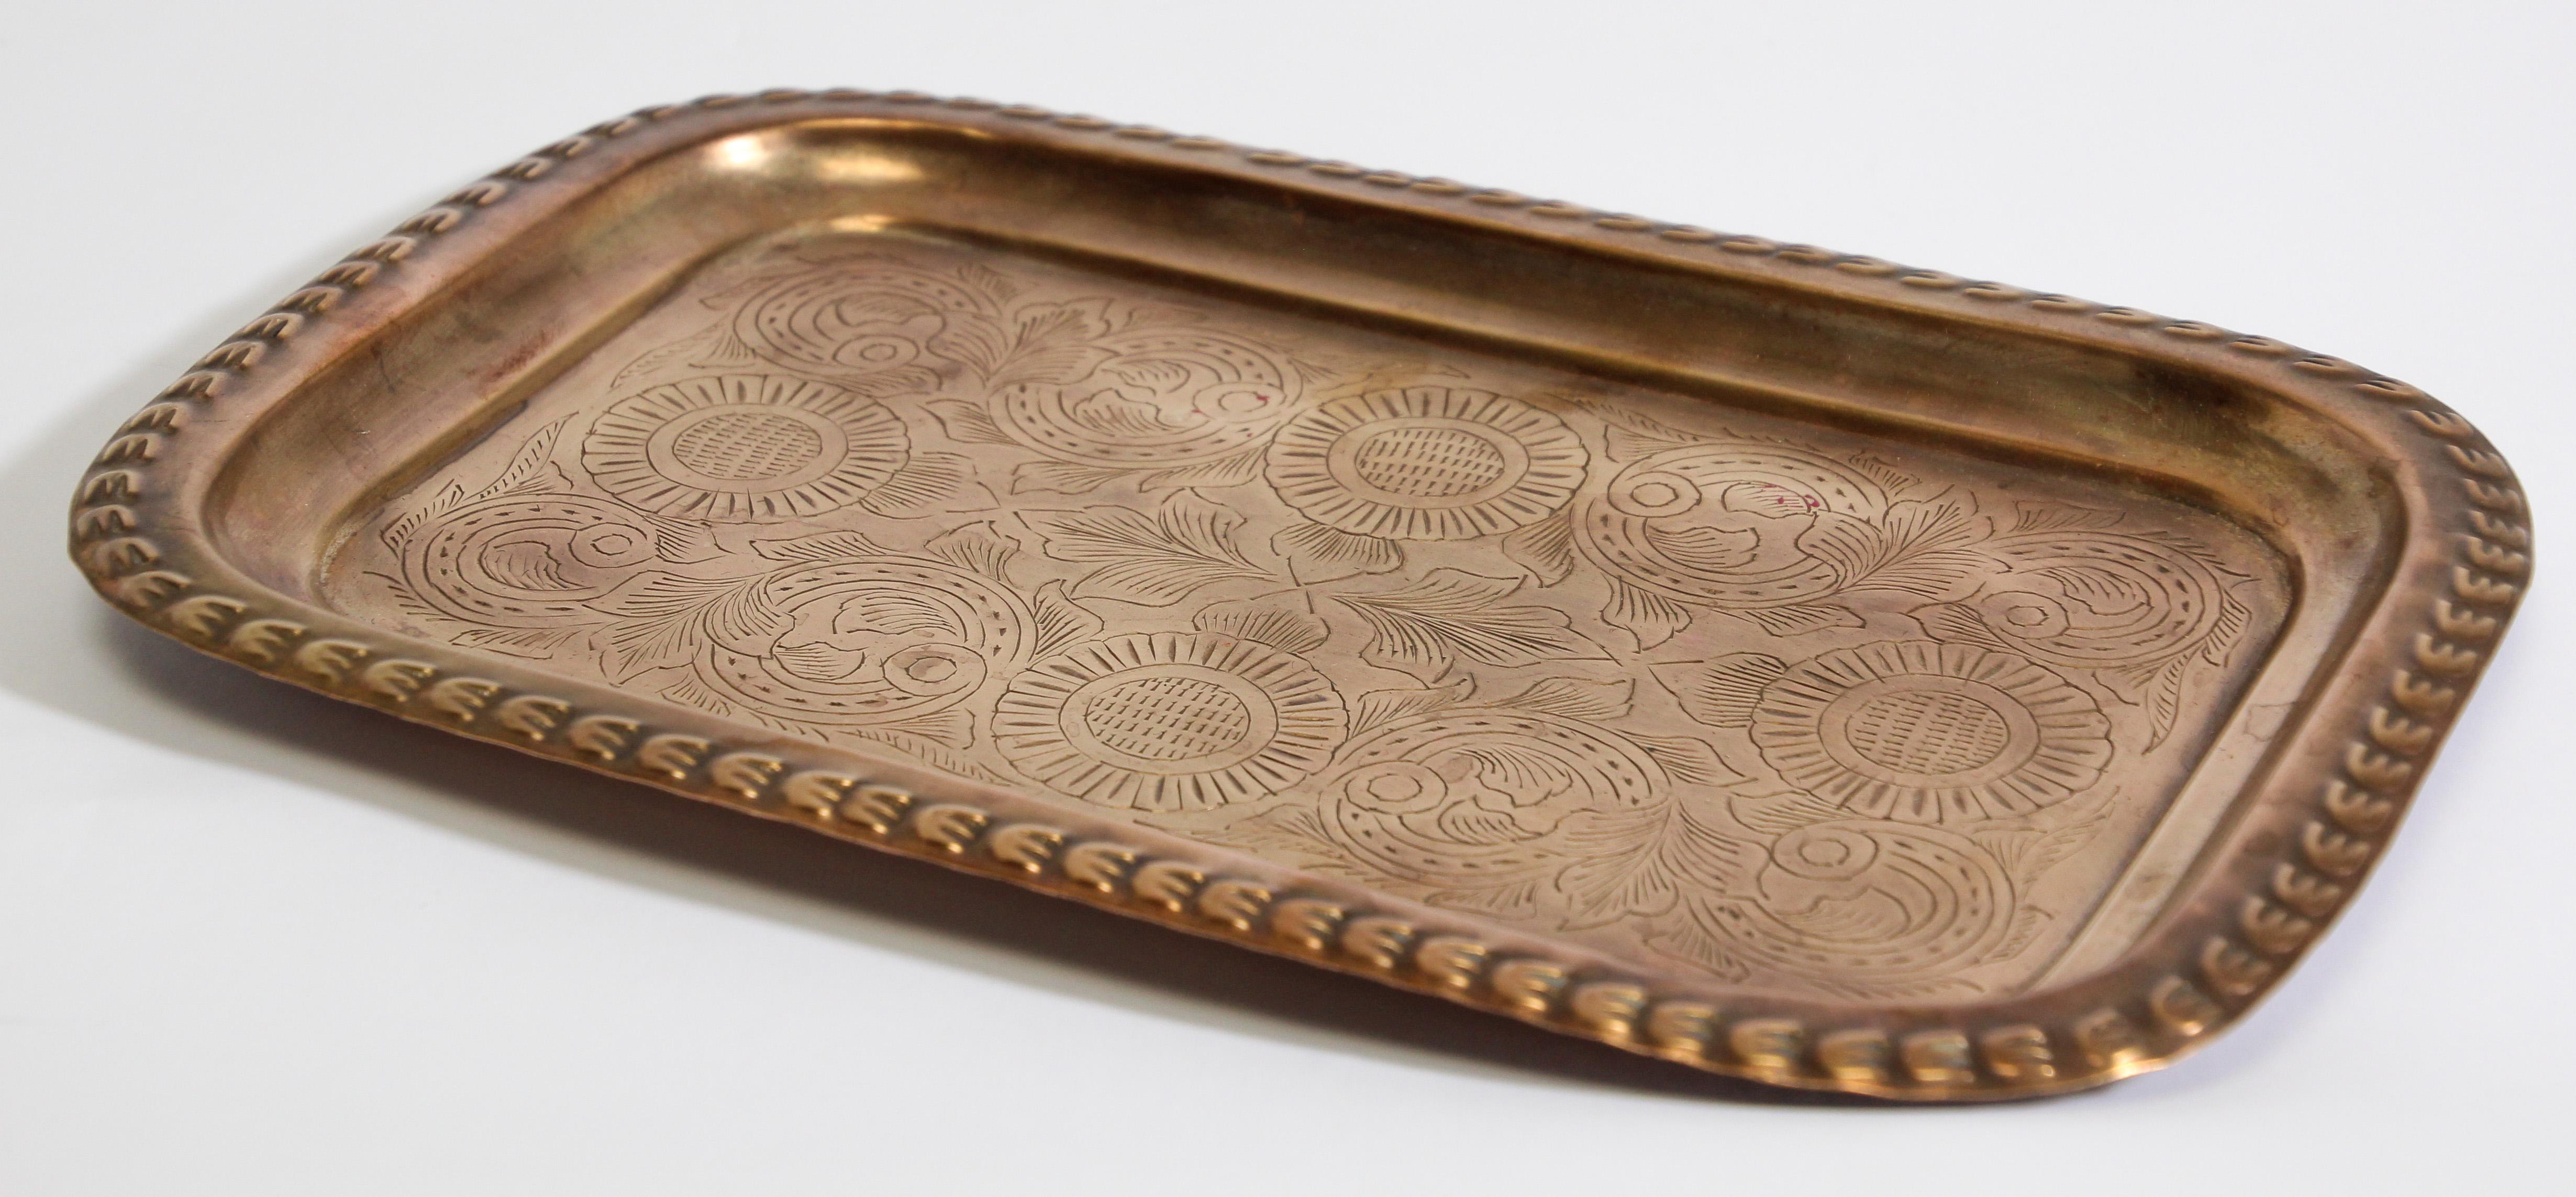 Handcrafted Moroccan Moorish rectangular brass tray hammered with fine delicate geometrical and floral designs.
Could be used as a serving tray platter.
Handmade in Morocco.
Dimensions: 8